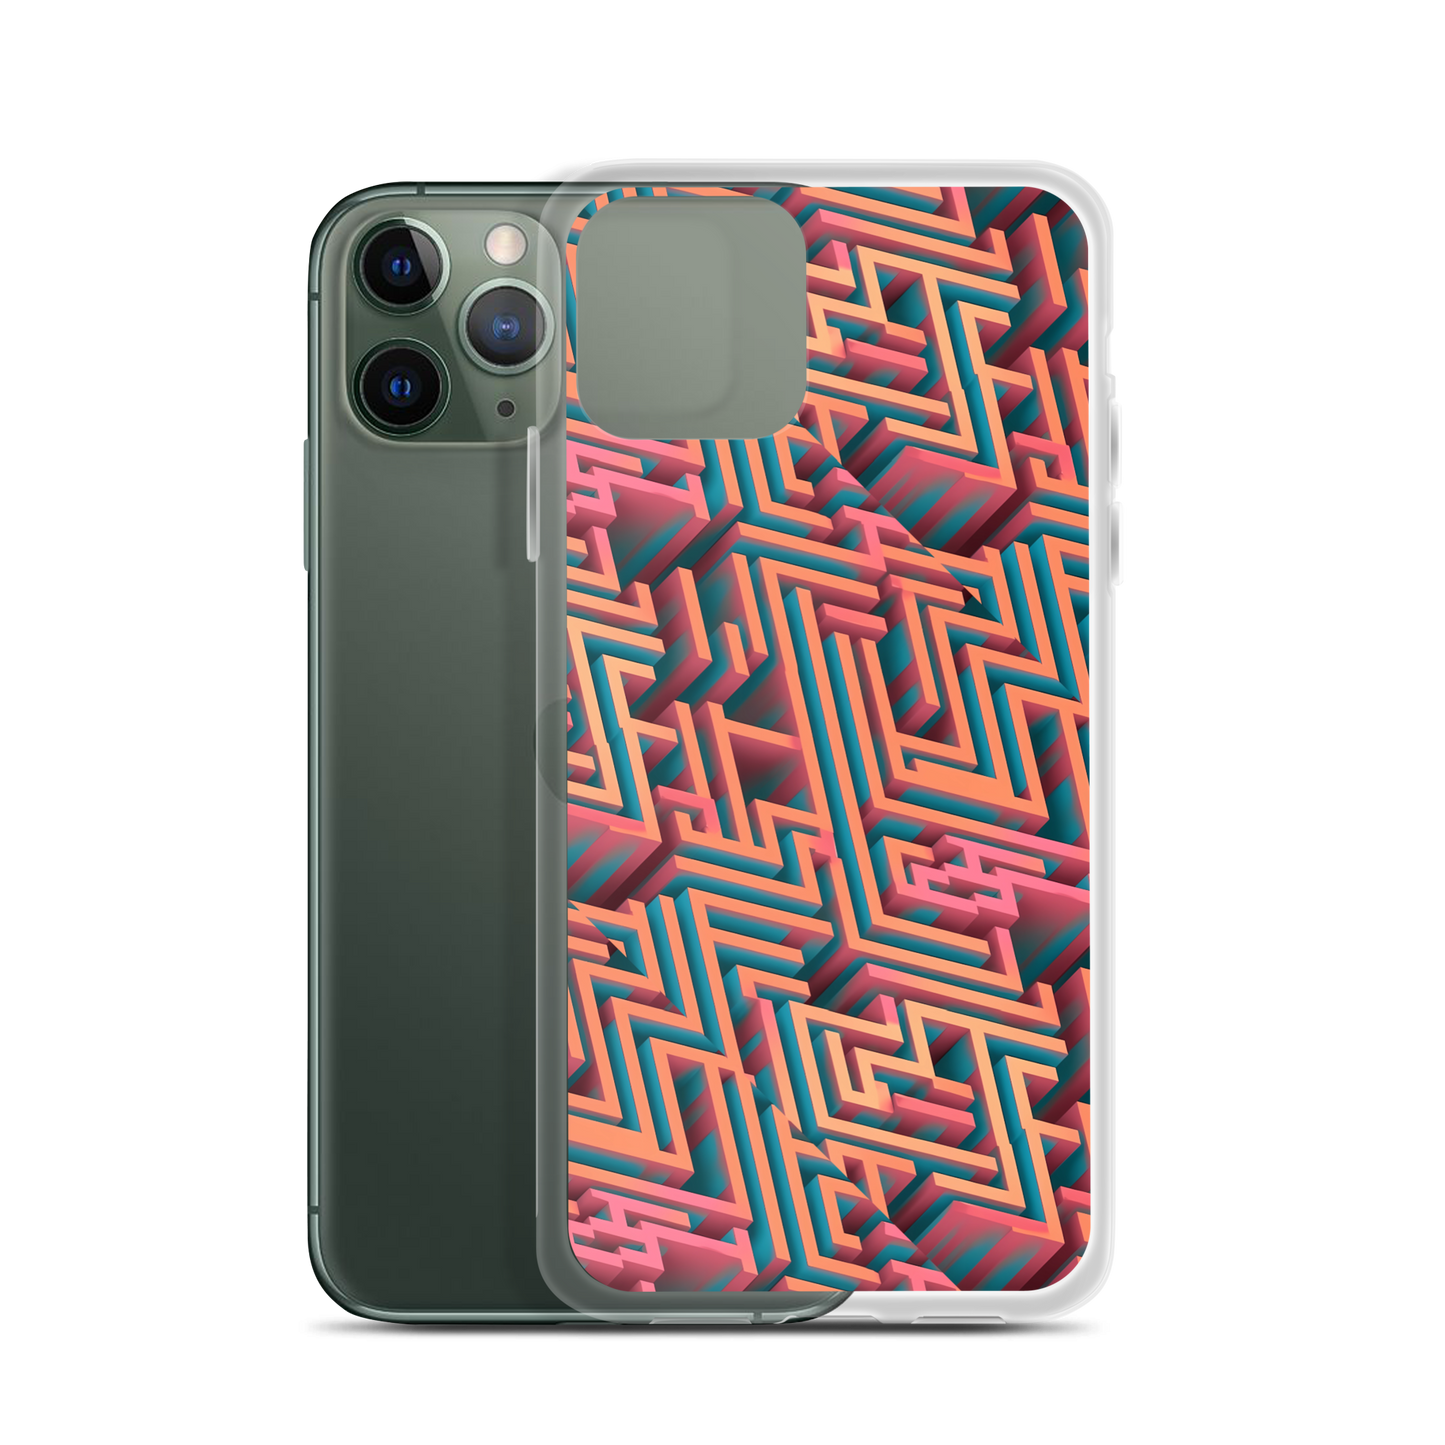 3D Maze Illusion | 3D Patterns | Clear Case for iPhone - #1